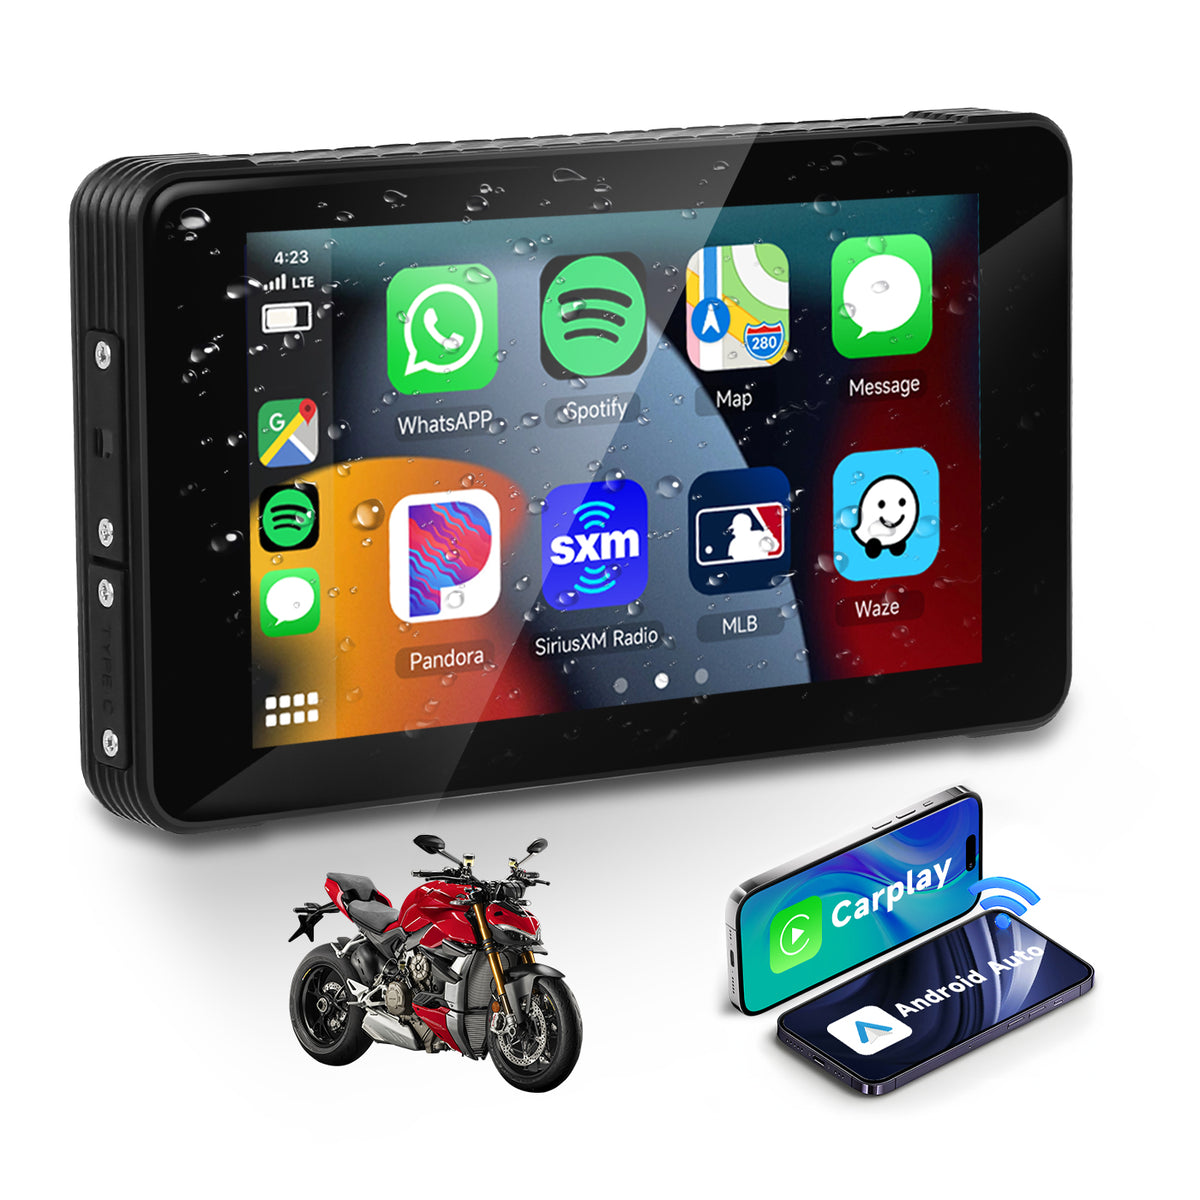 Podofo 5-inch Motorcycle GPS Wireless Carplay Android Auto Screen IP65 Waterproof screen, Dual Bluetooth Connectivity, TF/Type-C for Software Upgrade